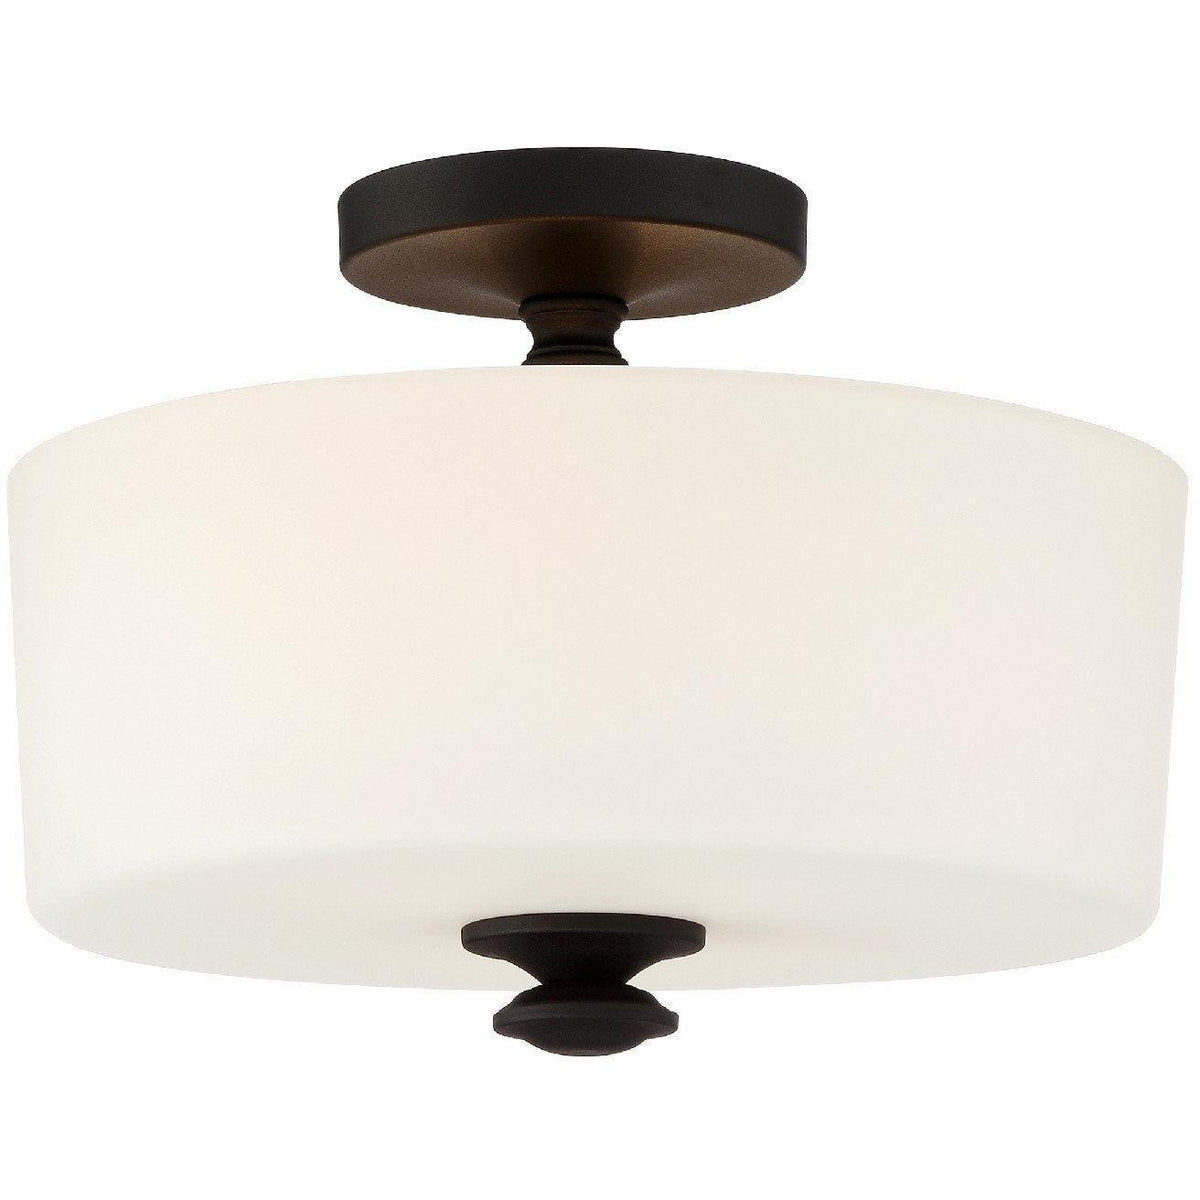 Crystorama - Travis Two Light Ceiling Mount - TRA-A3302-BF | Montreal Lighting & Hardware